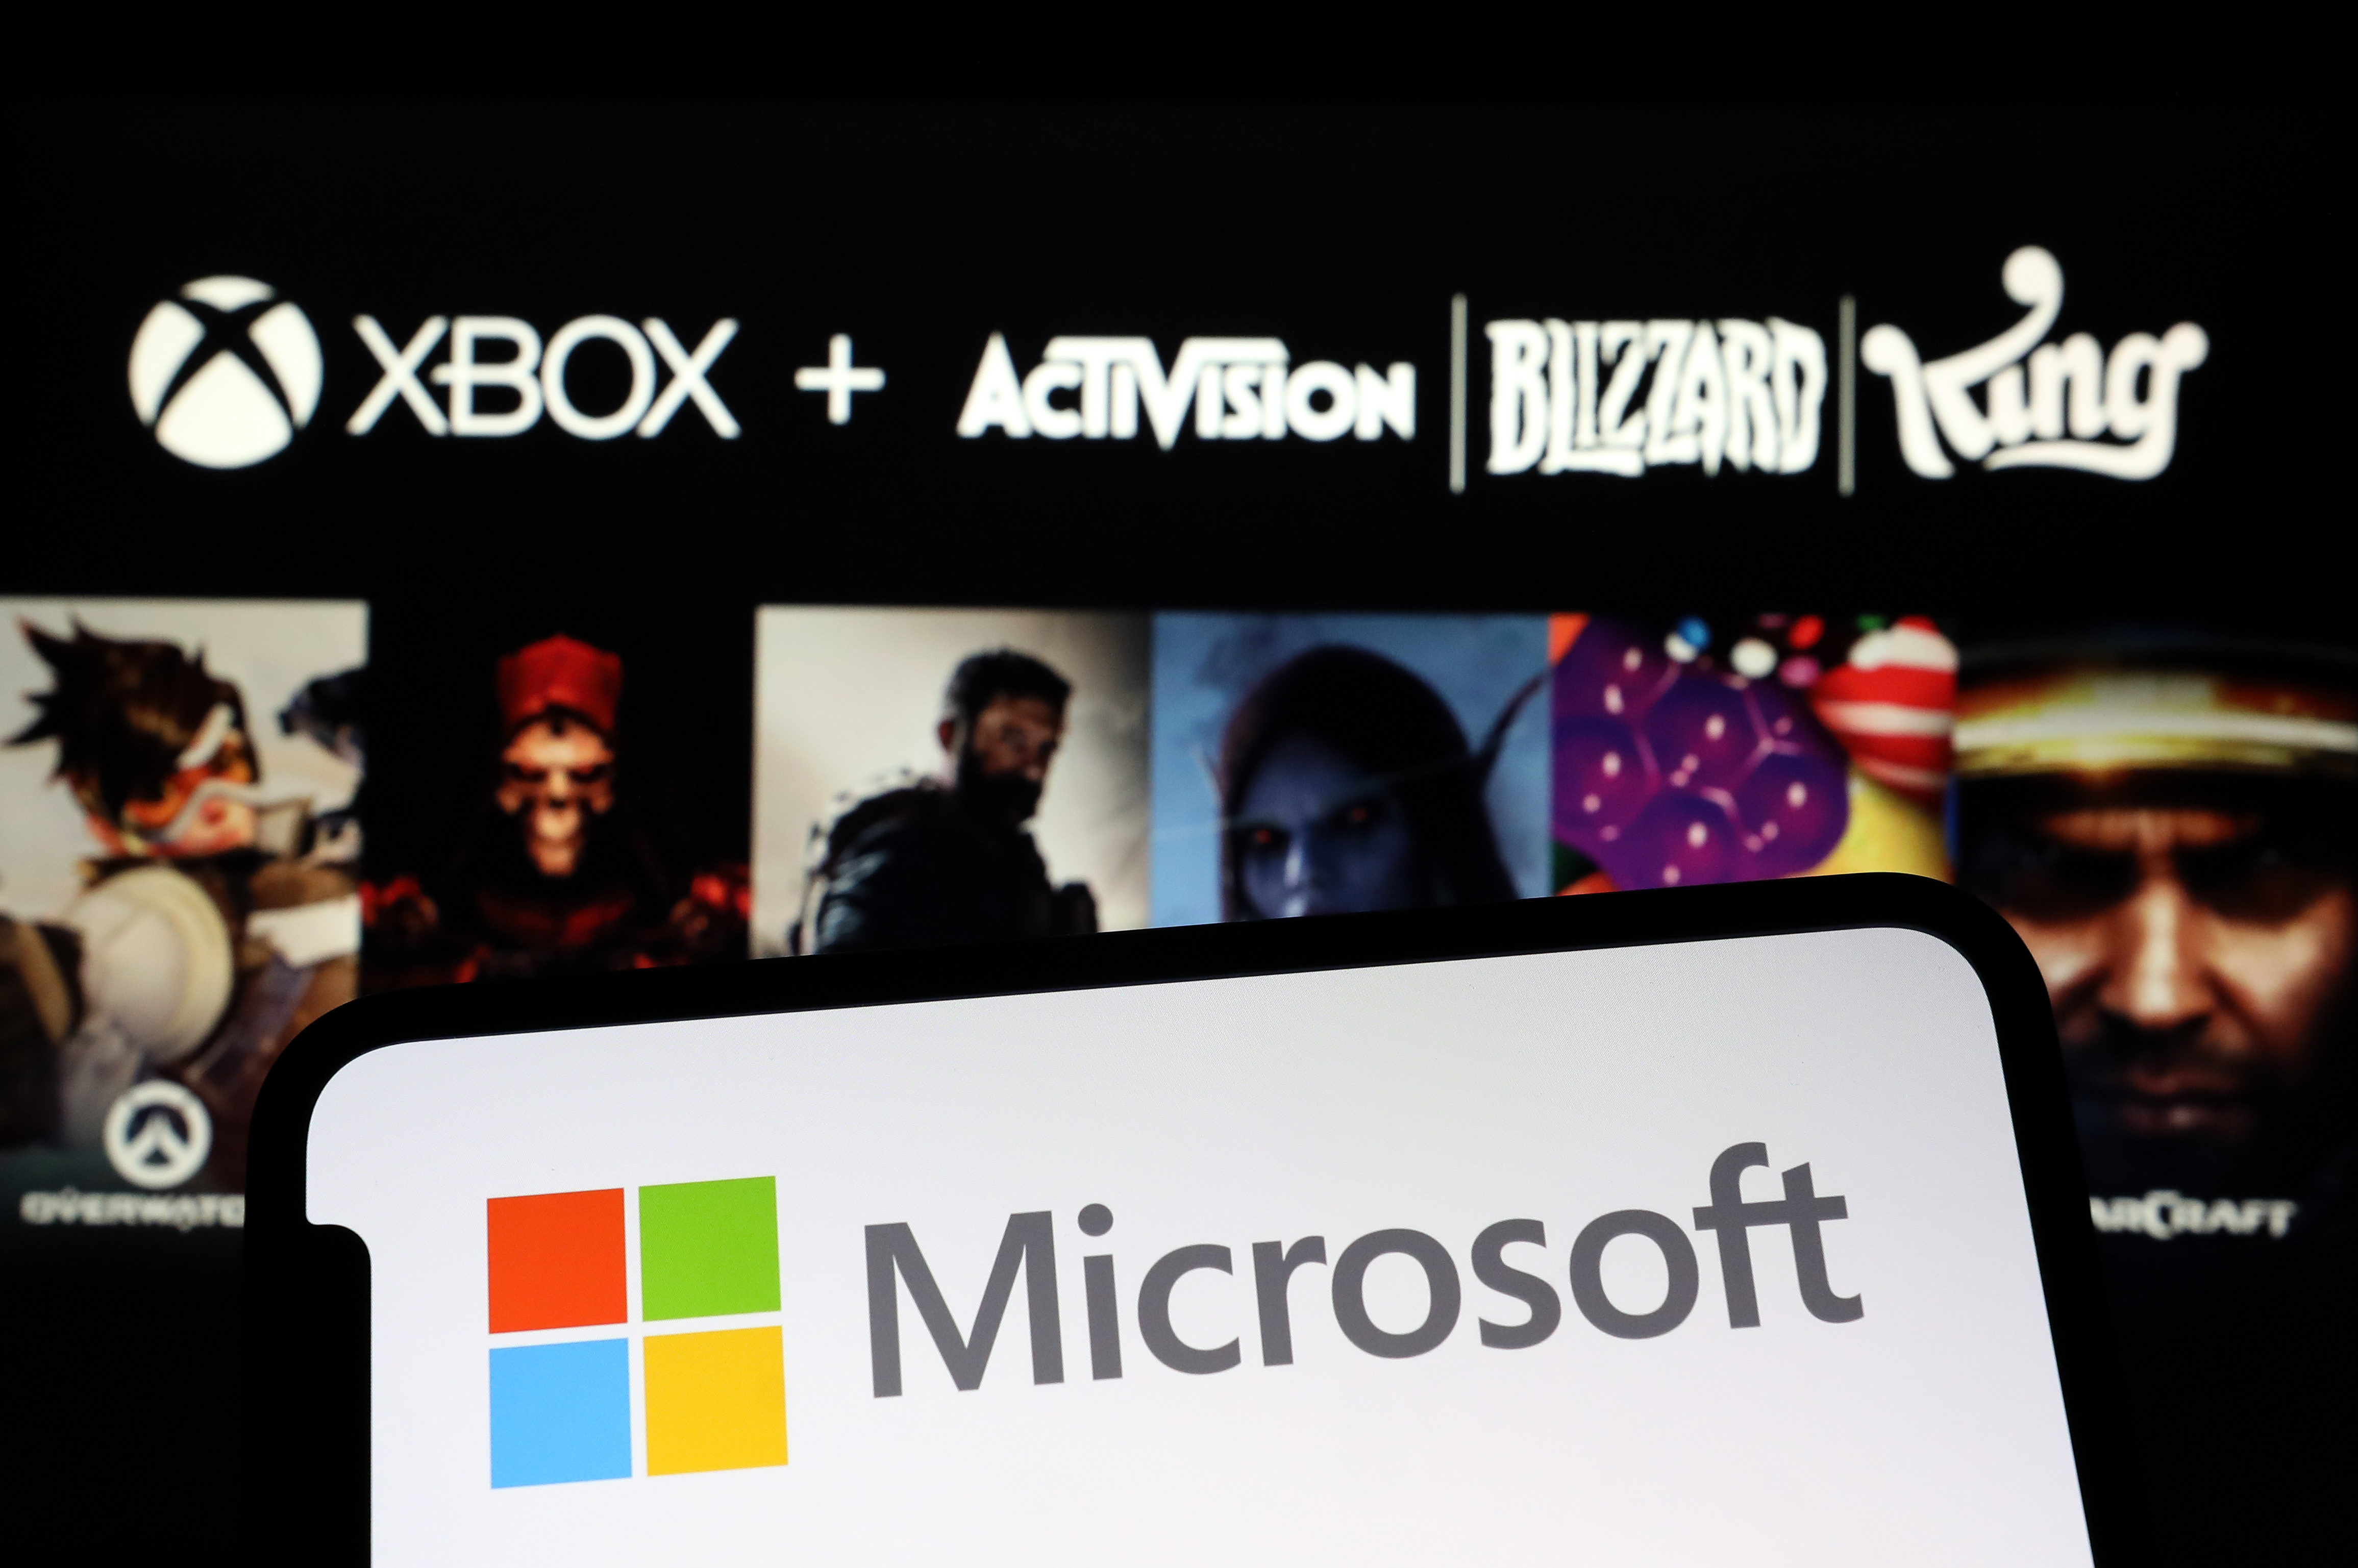 Microsoft and Activision Blizzard file responses to the FTC’s antitrust lawsuit | Engadget